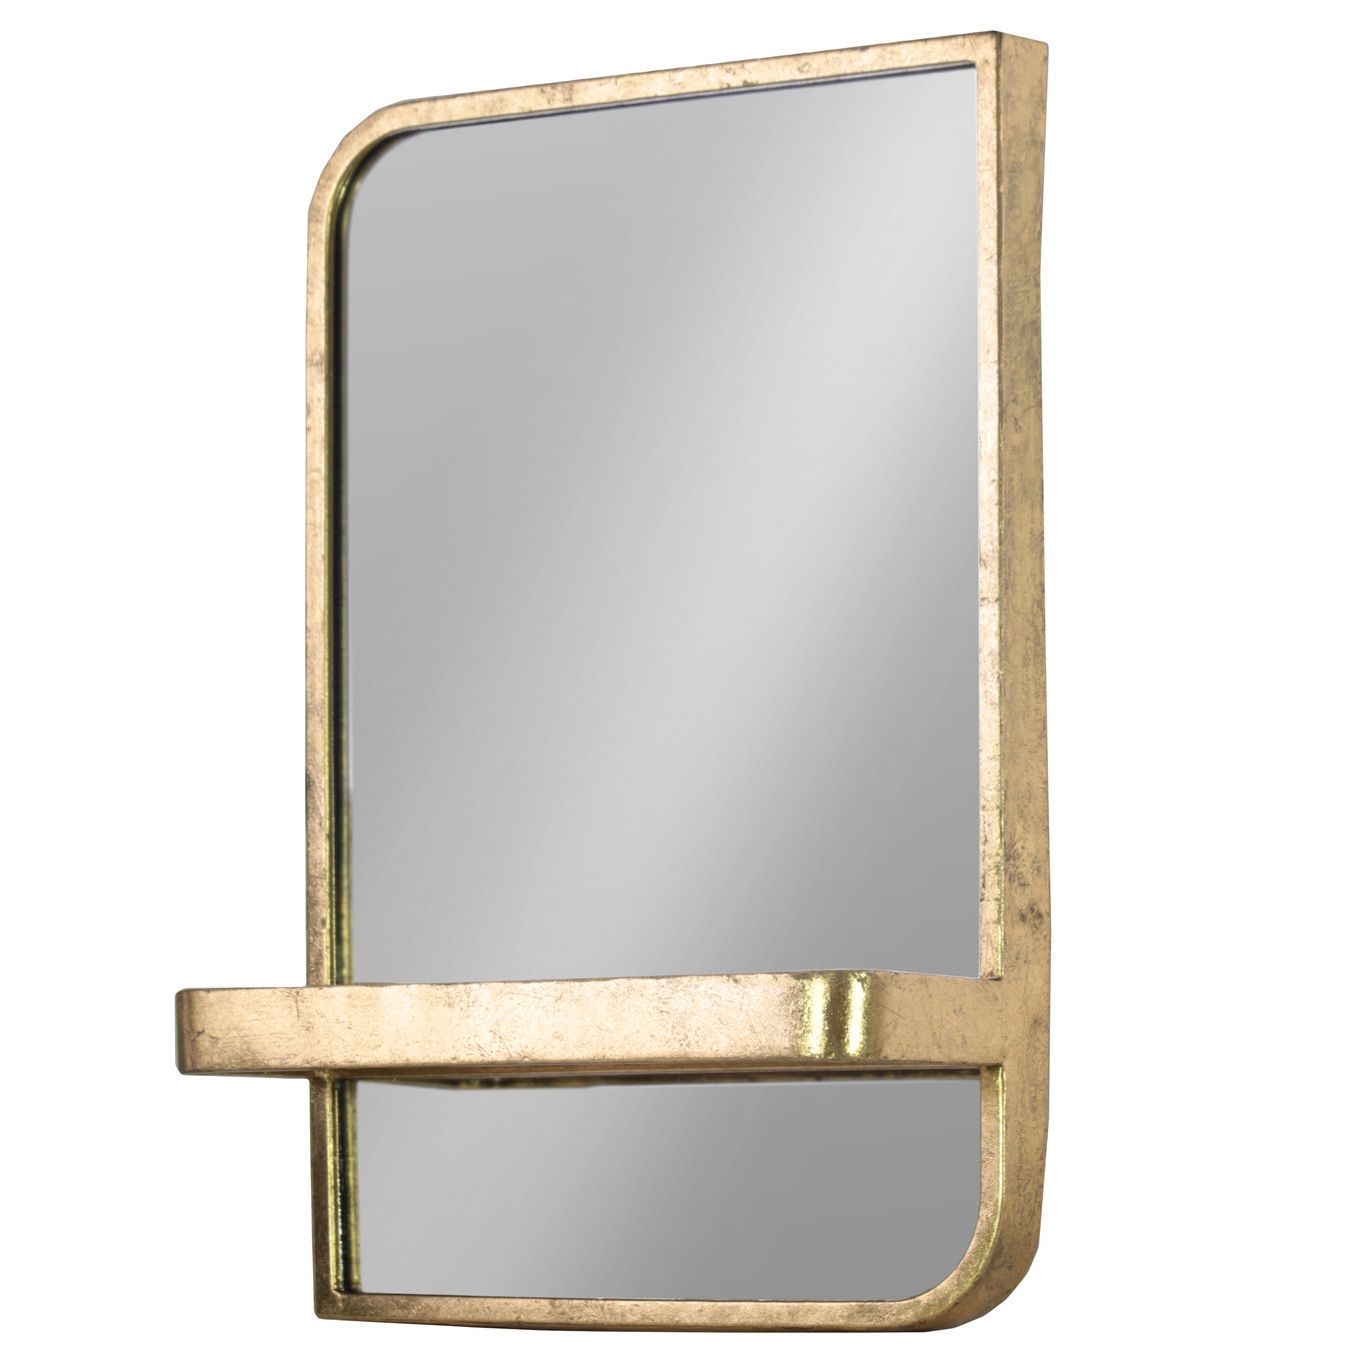 Fausto Rectangle Metal Wall Mirror With Shelf Intended For Best And Newest Tellier Accent Wall Mirrors (View 20 of 20)